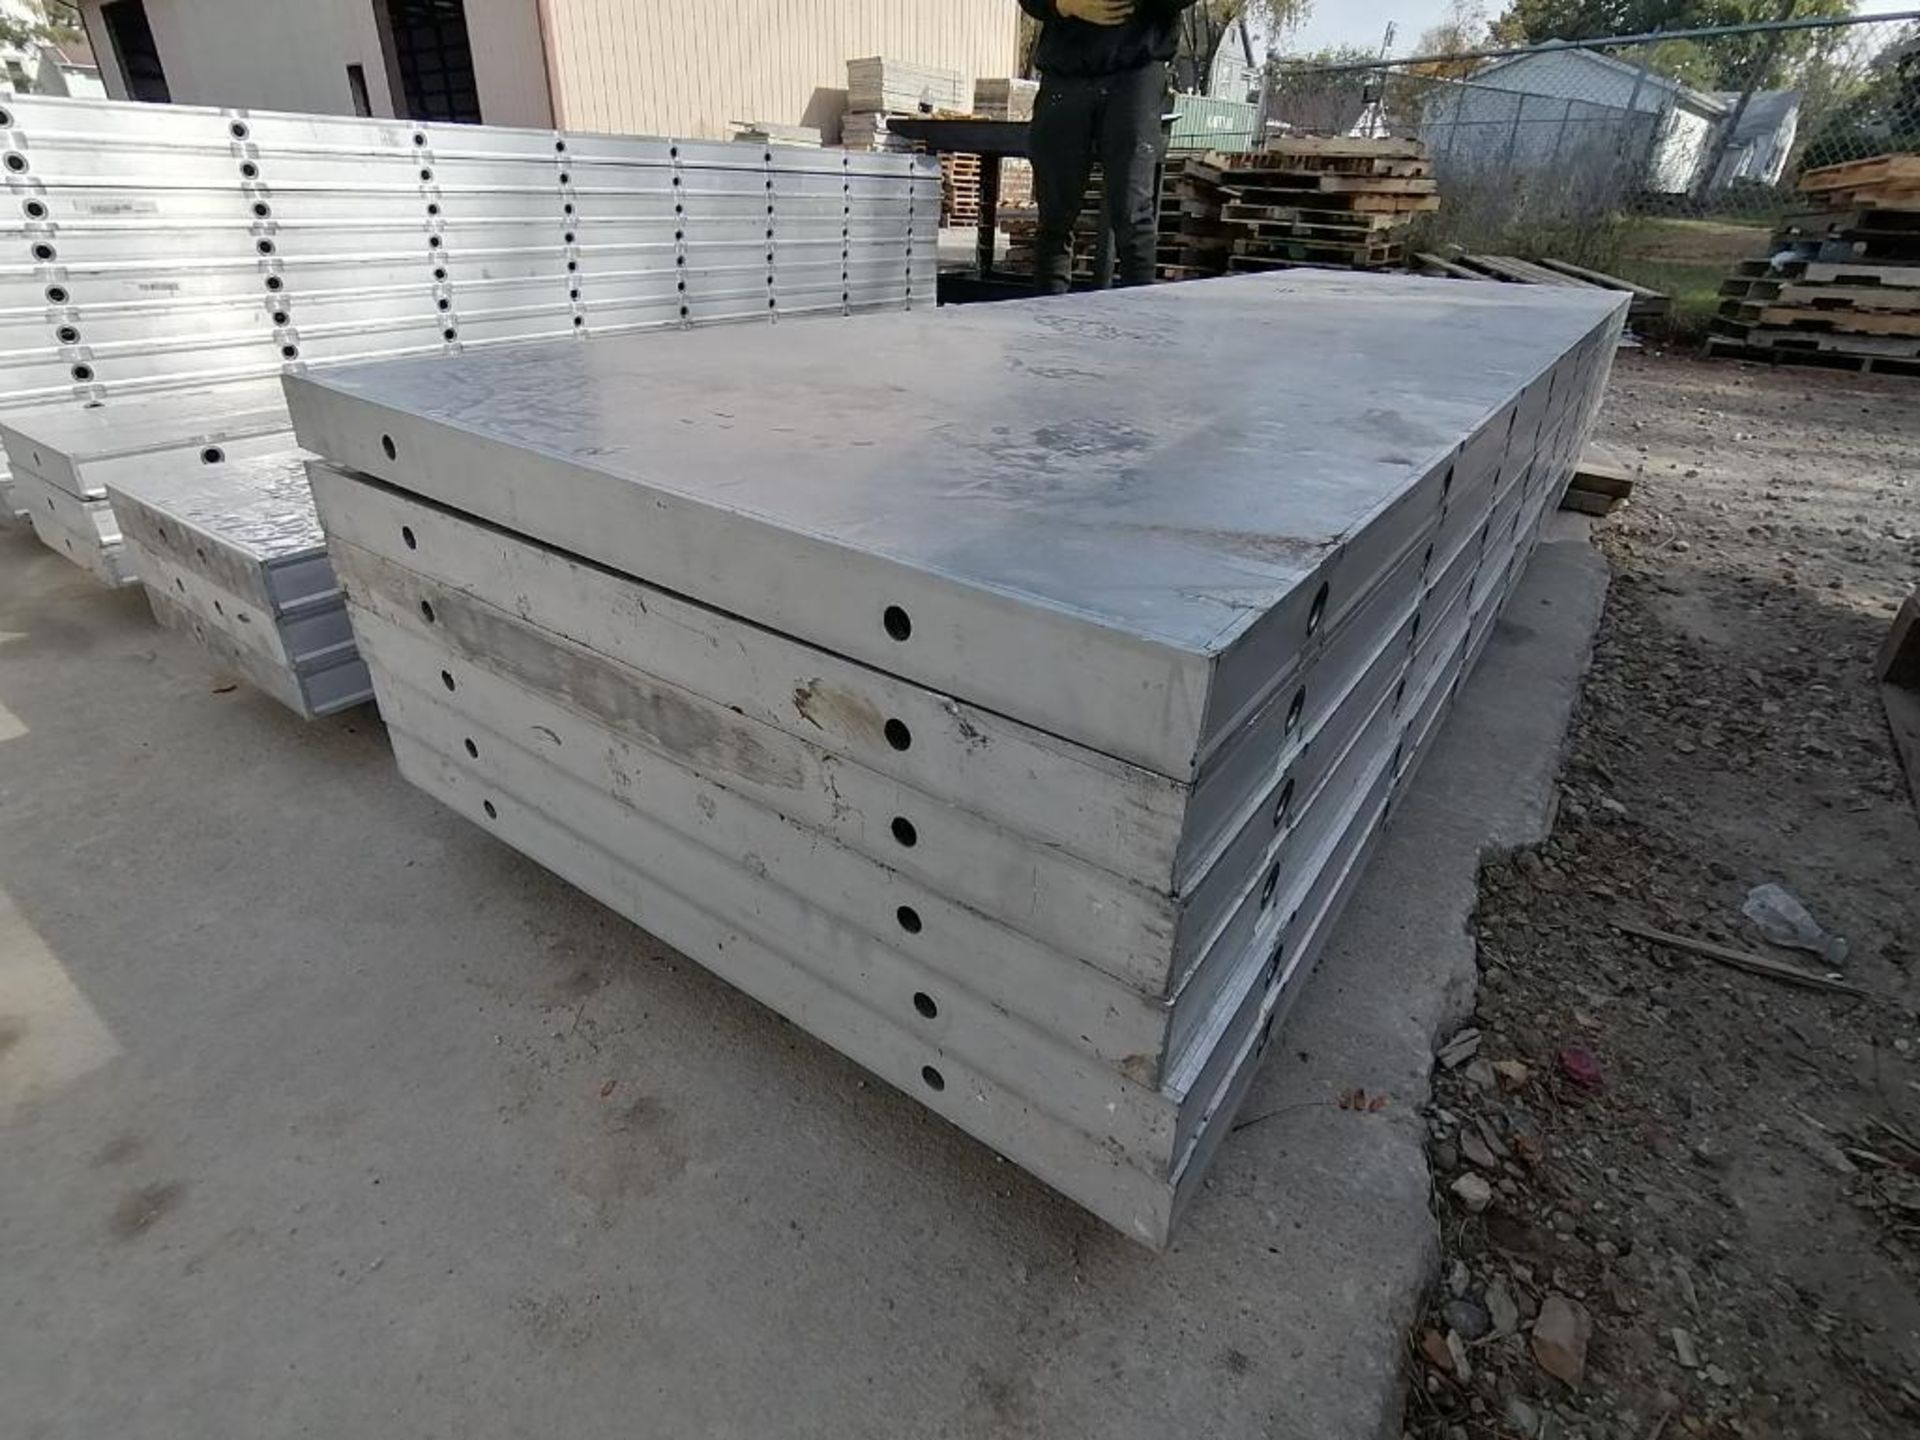 (6) 30" x 8' NEW Badger Smooth Aluminum Concrete Forms 6-12 Hole Pattern. Located in Mt. Pleasant, - Image 2 of 4